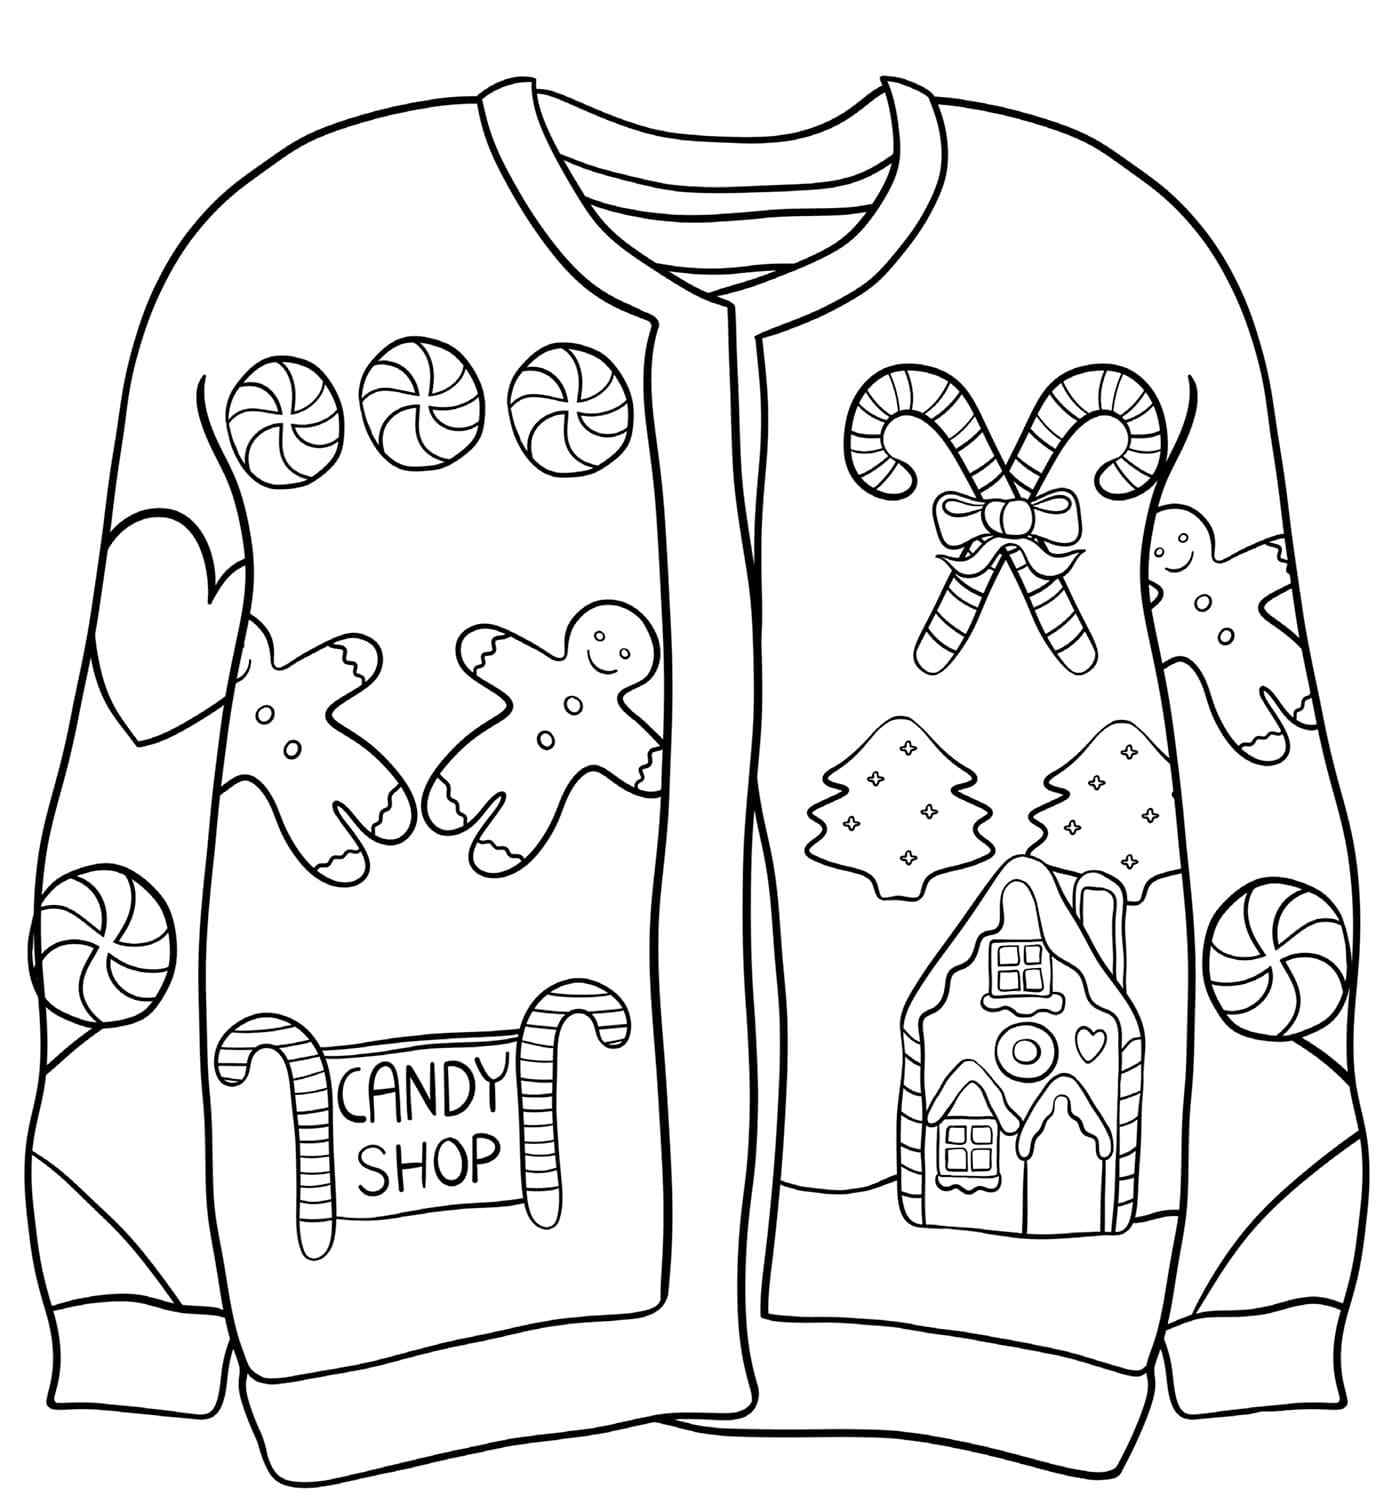 Cardigan With Gingerbread Men